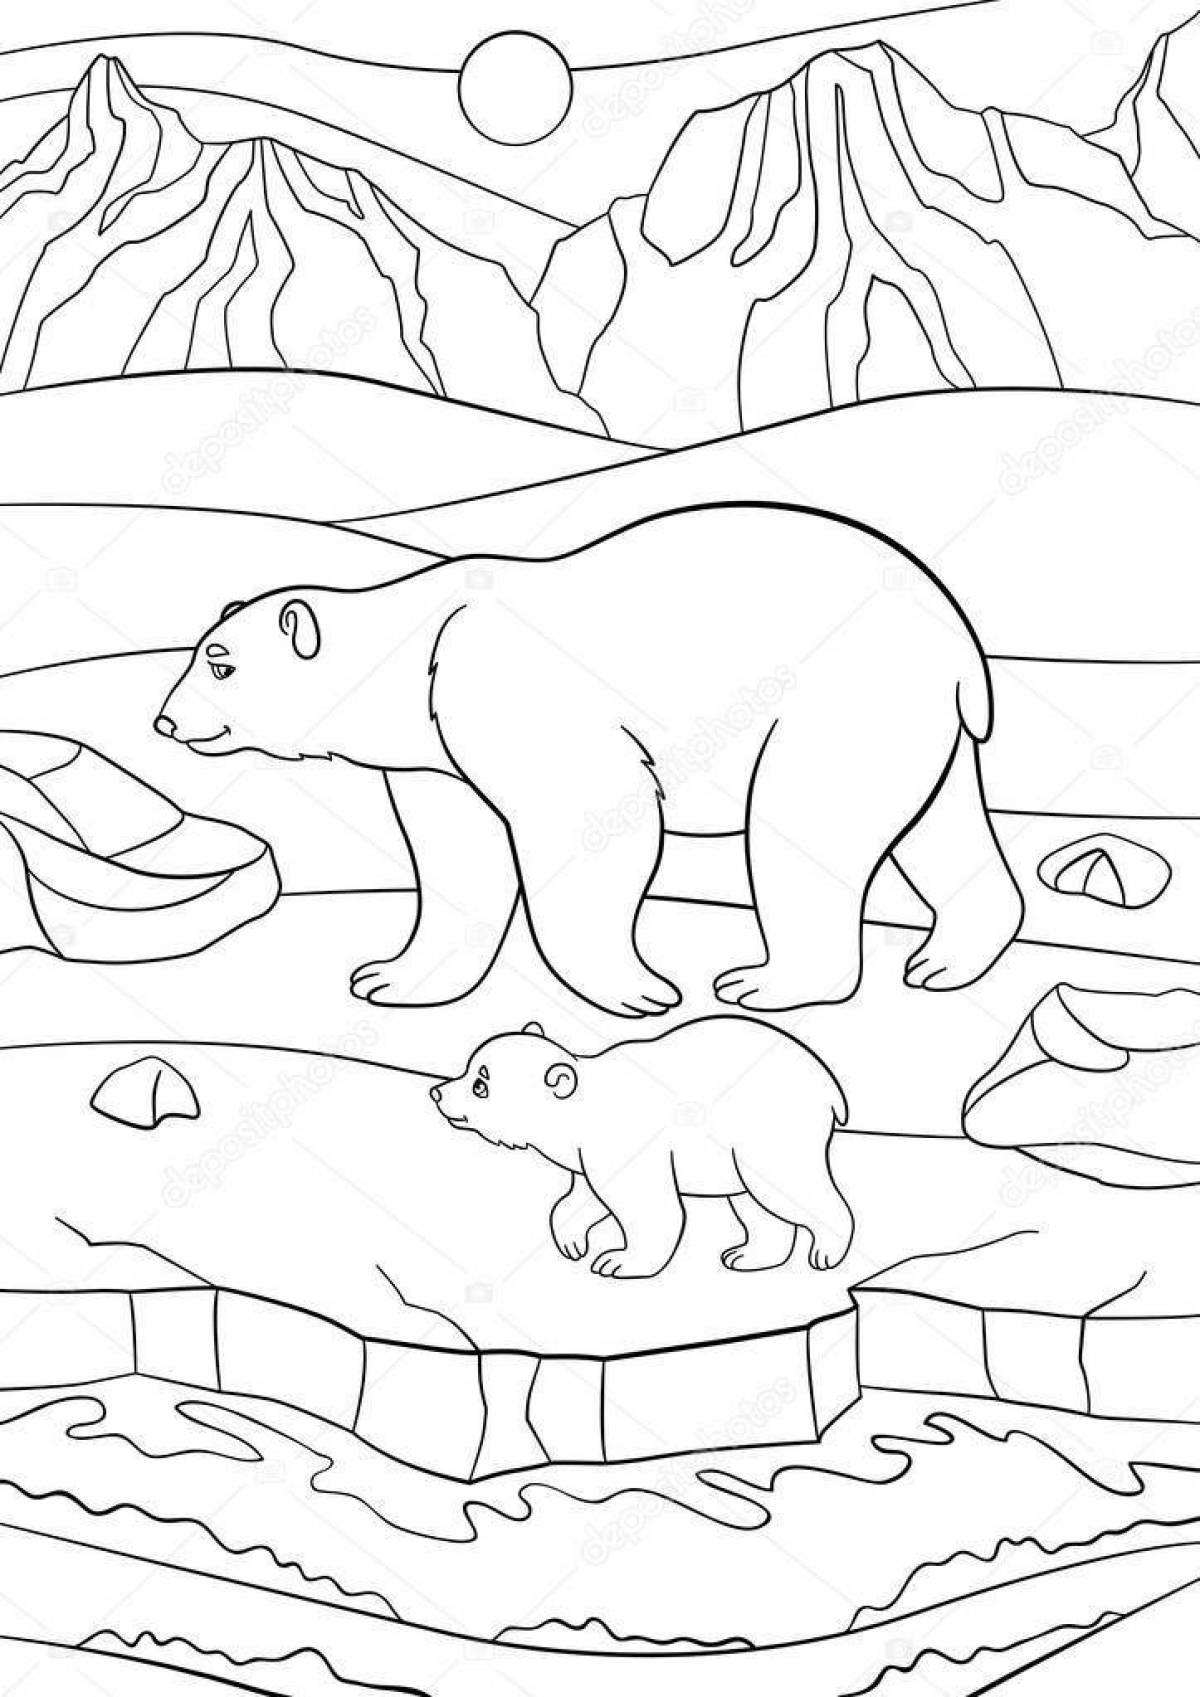 Fairy coloring pages animals of the north pole